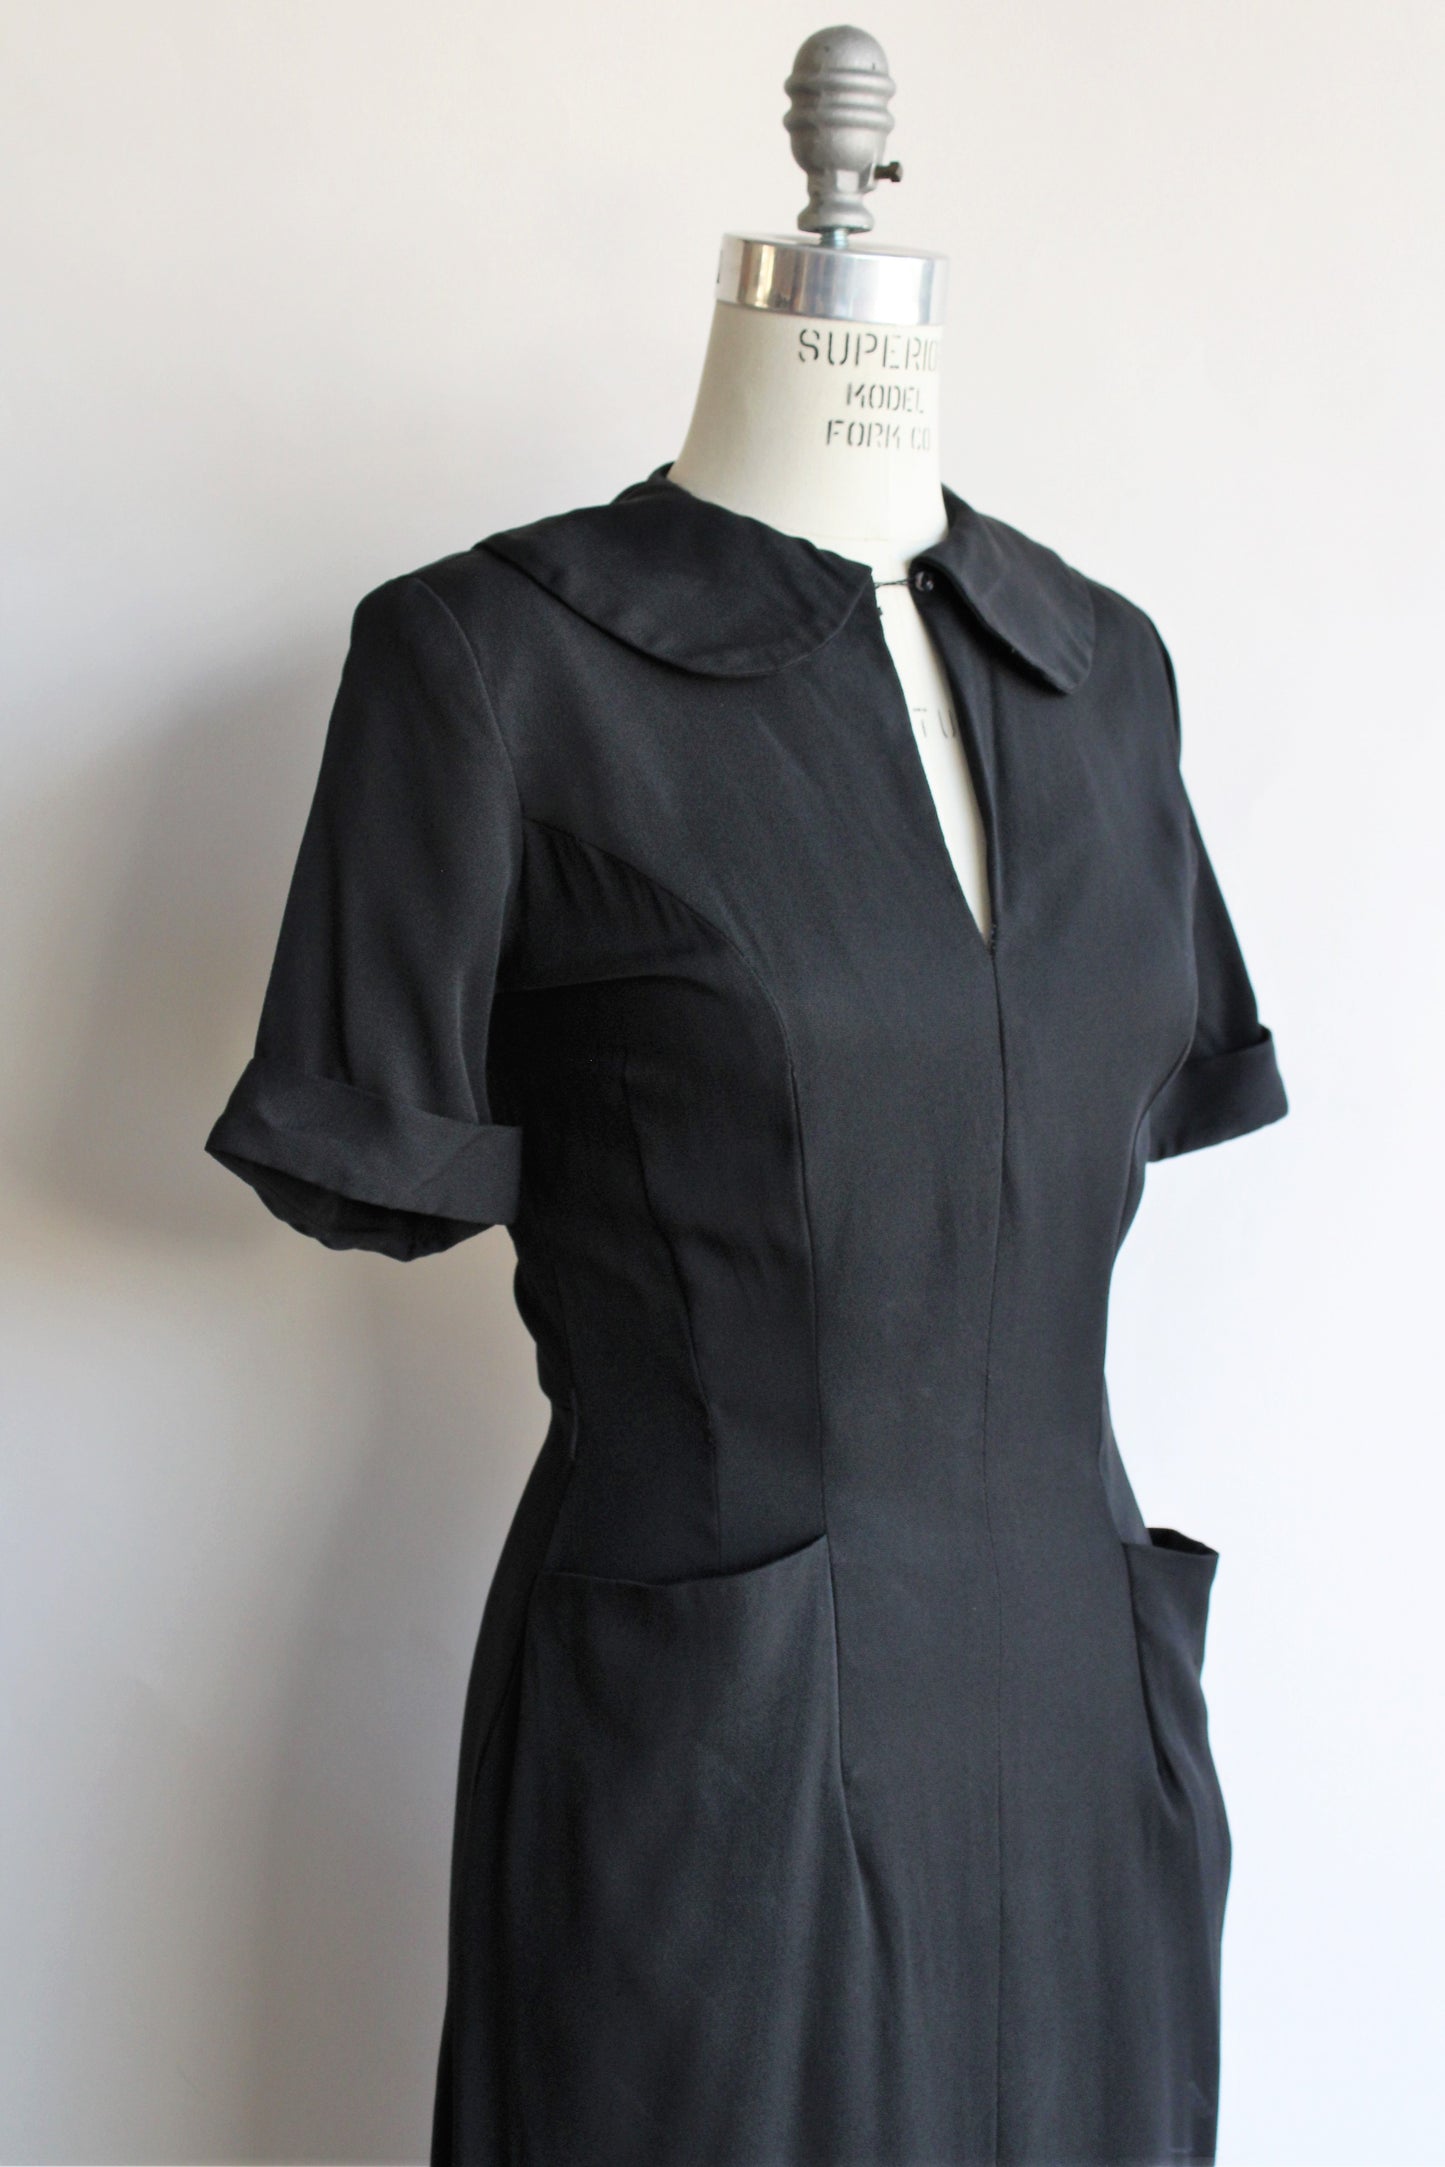 Vintage 1940s Rayon Crepe Dress with Pockets, Keyhole Neck and Peter P ...